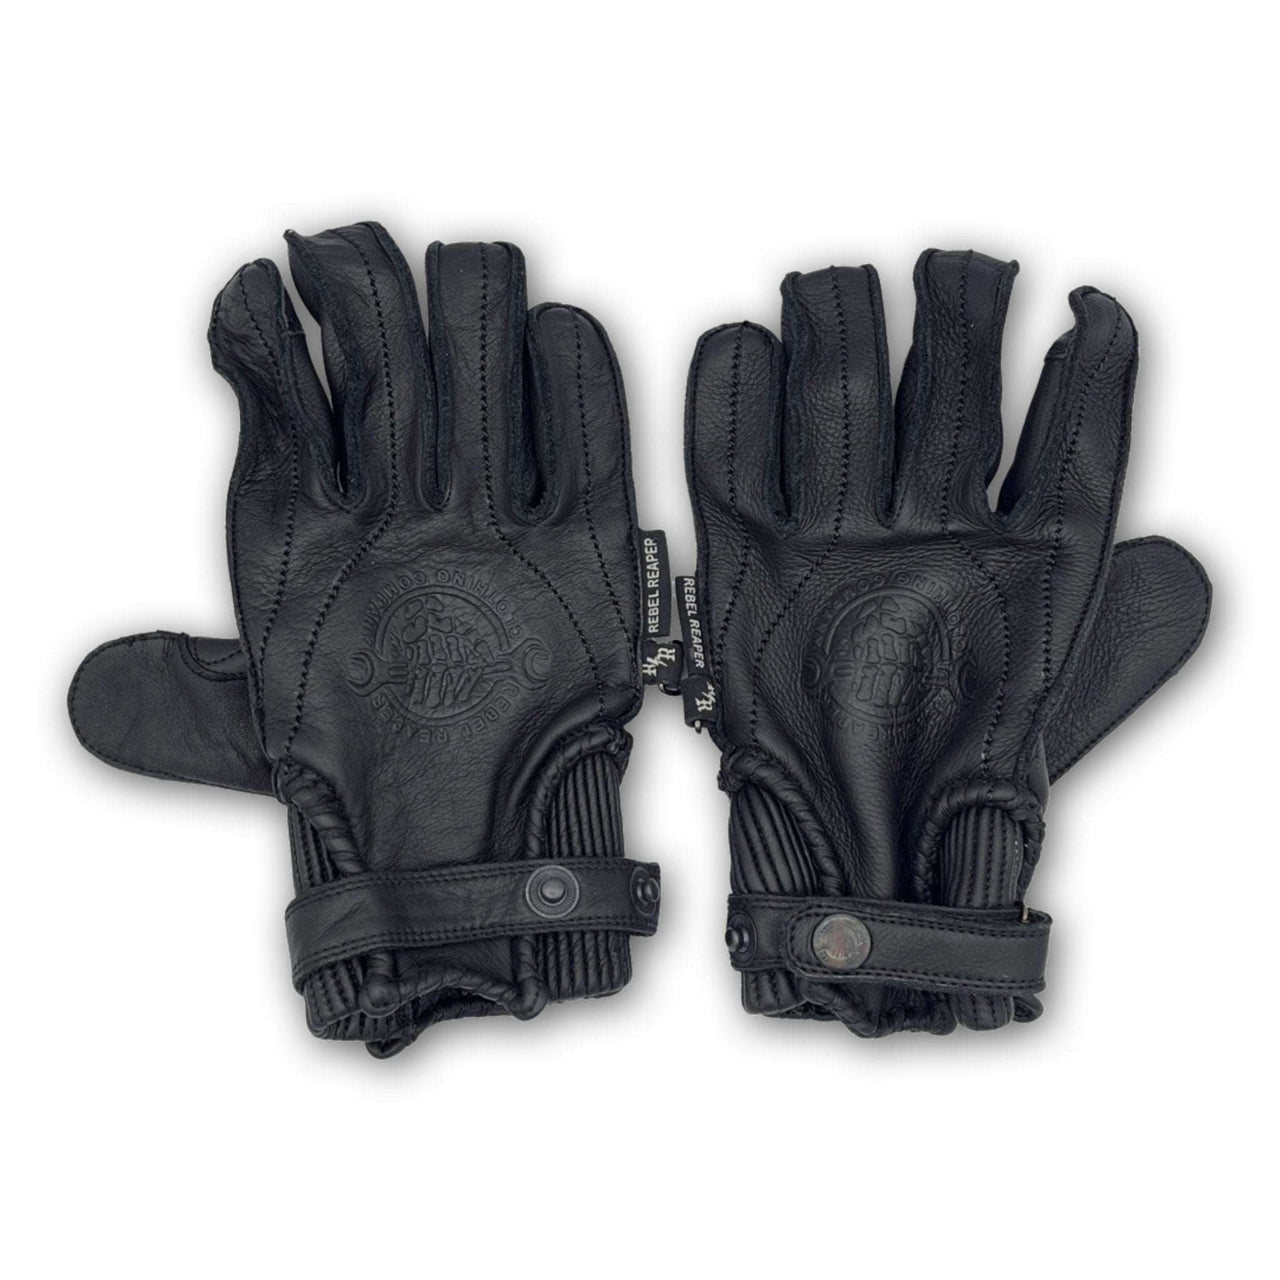 Leather Motorcycle Riding Gloves - Modern Roper - Black - Rebel Reaper Clothing CompanyLeather Gloves